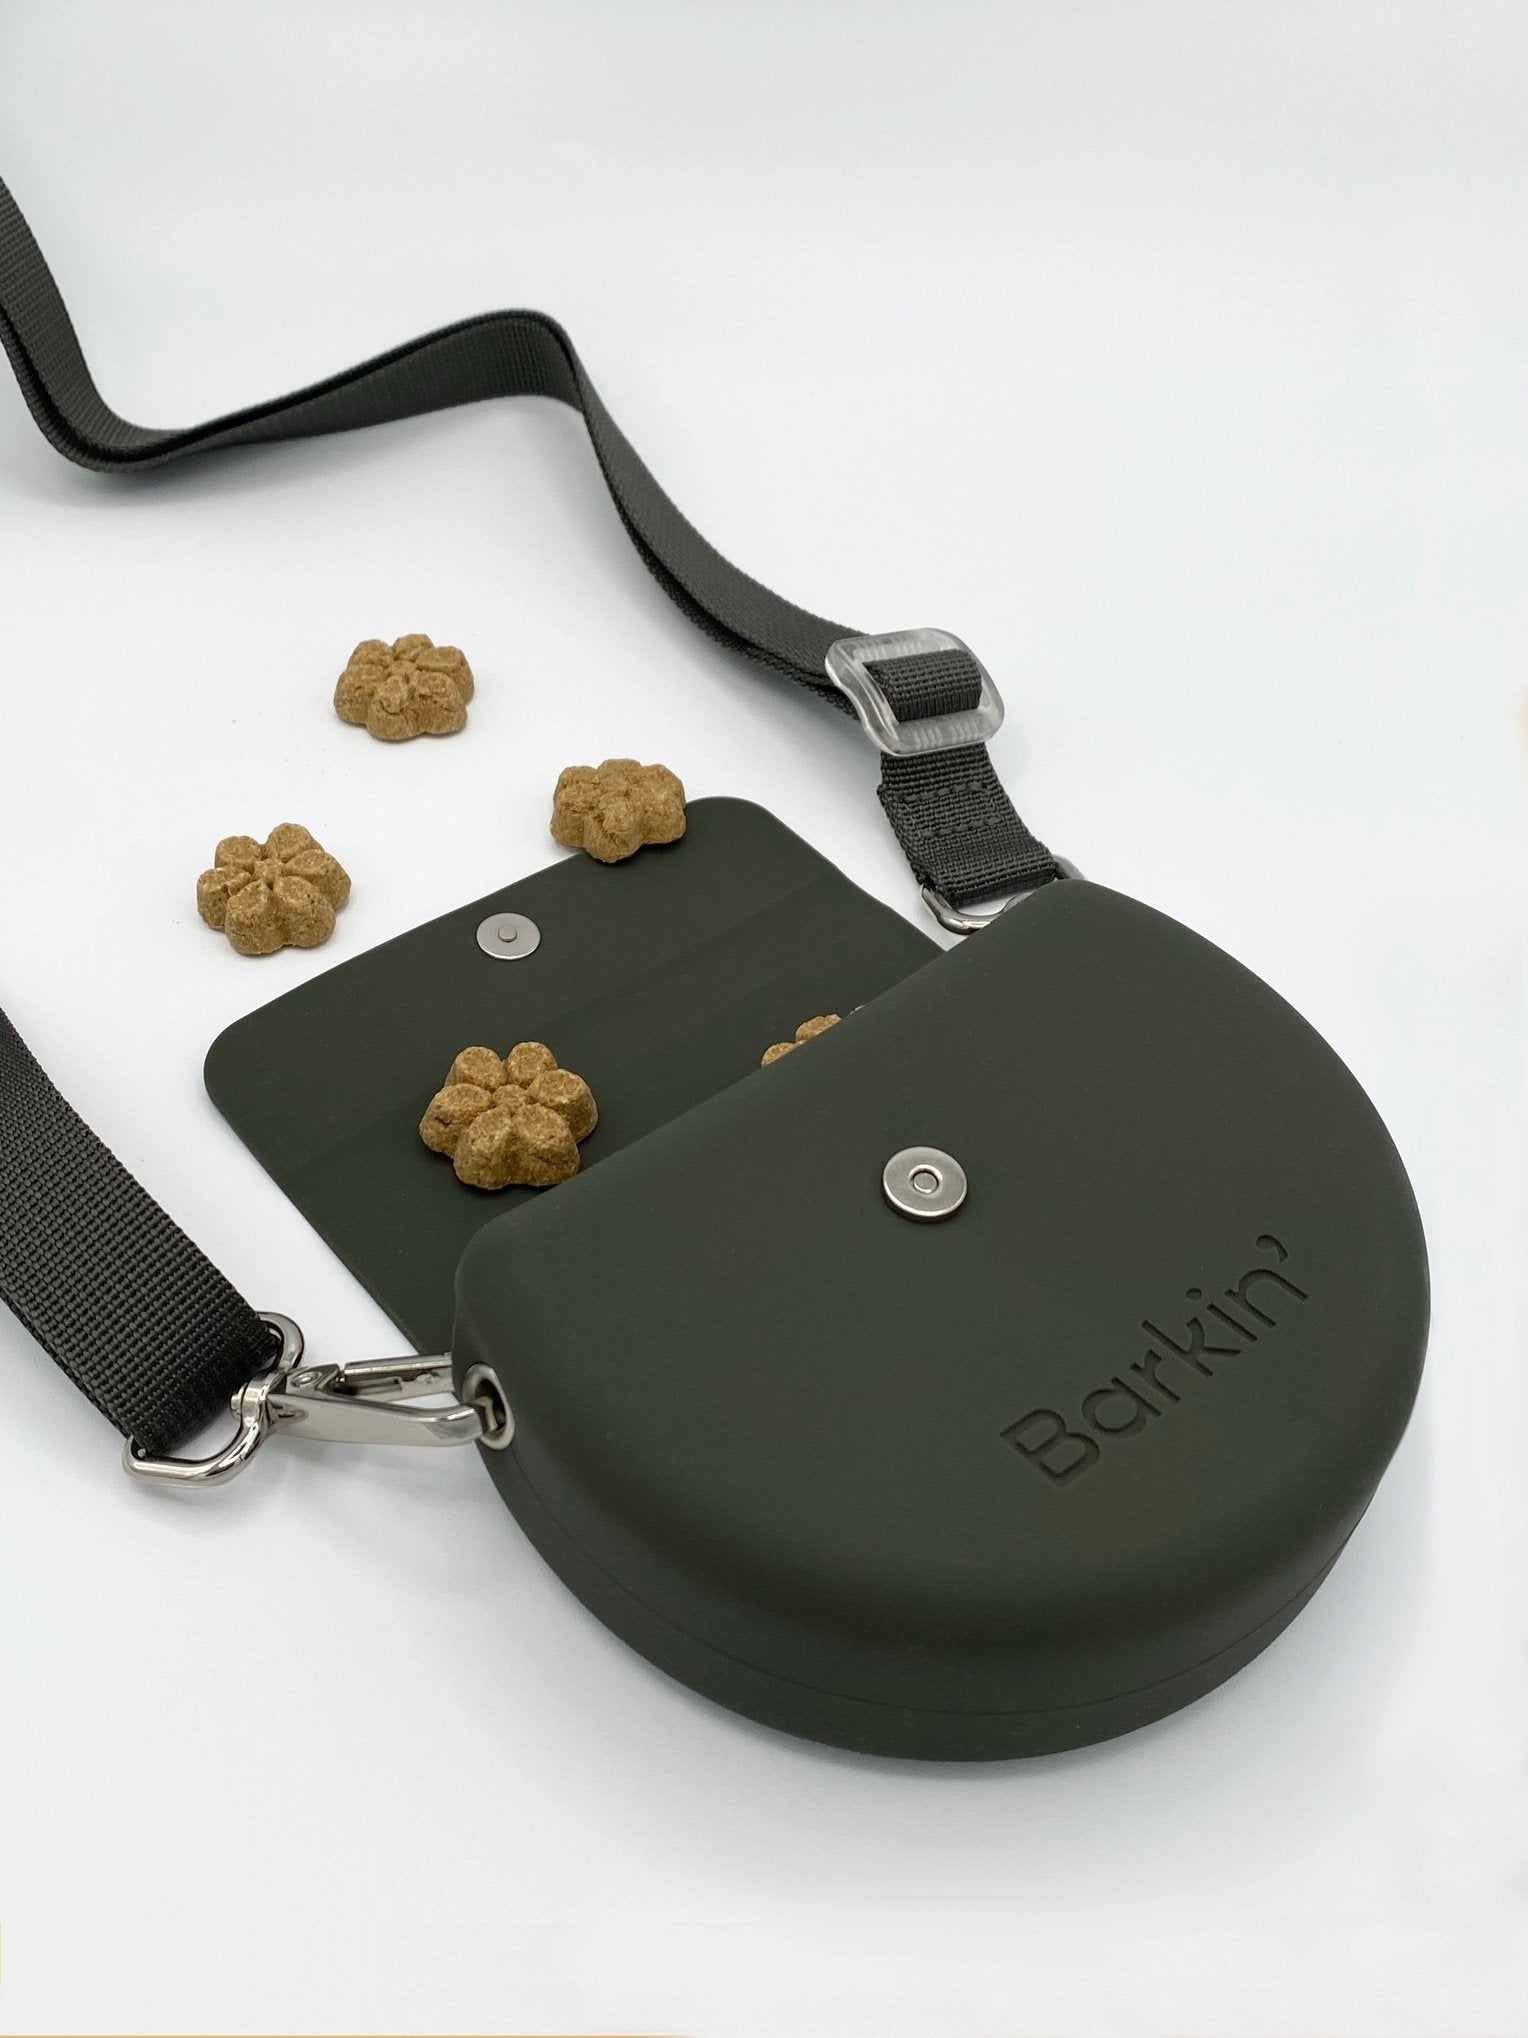 Elevate dog training with our Barkin' Treat Pouch in stylish olive.